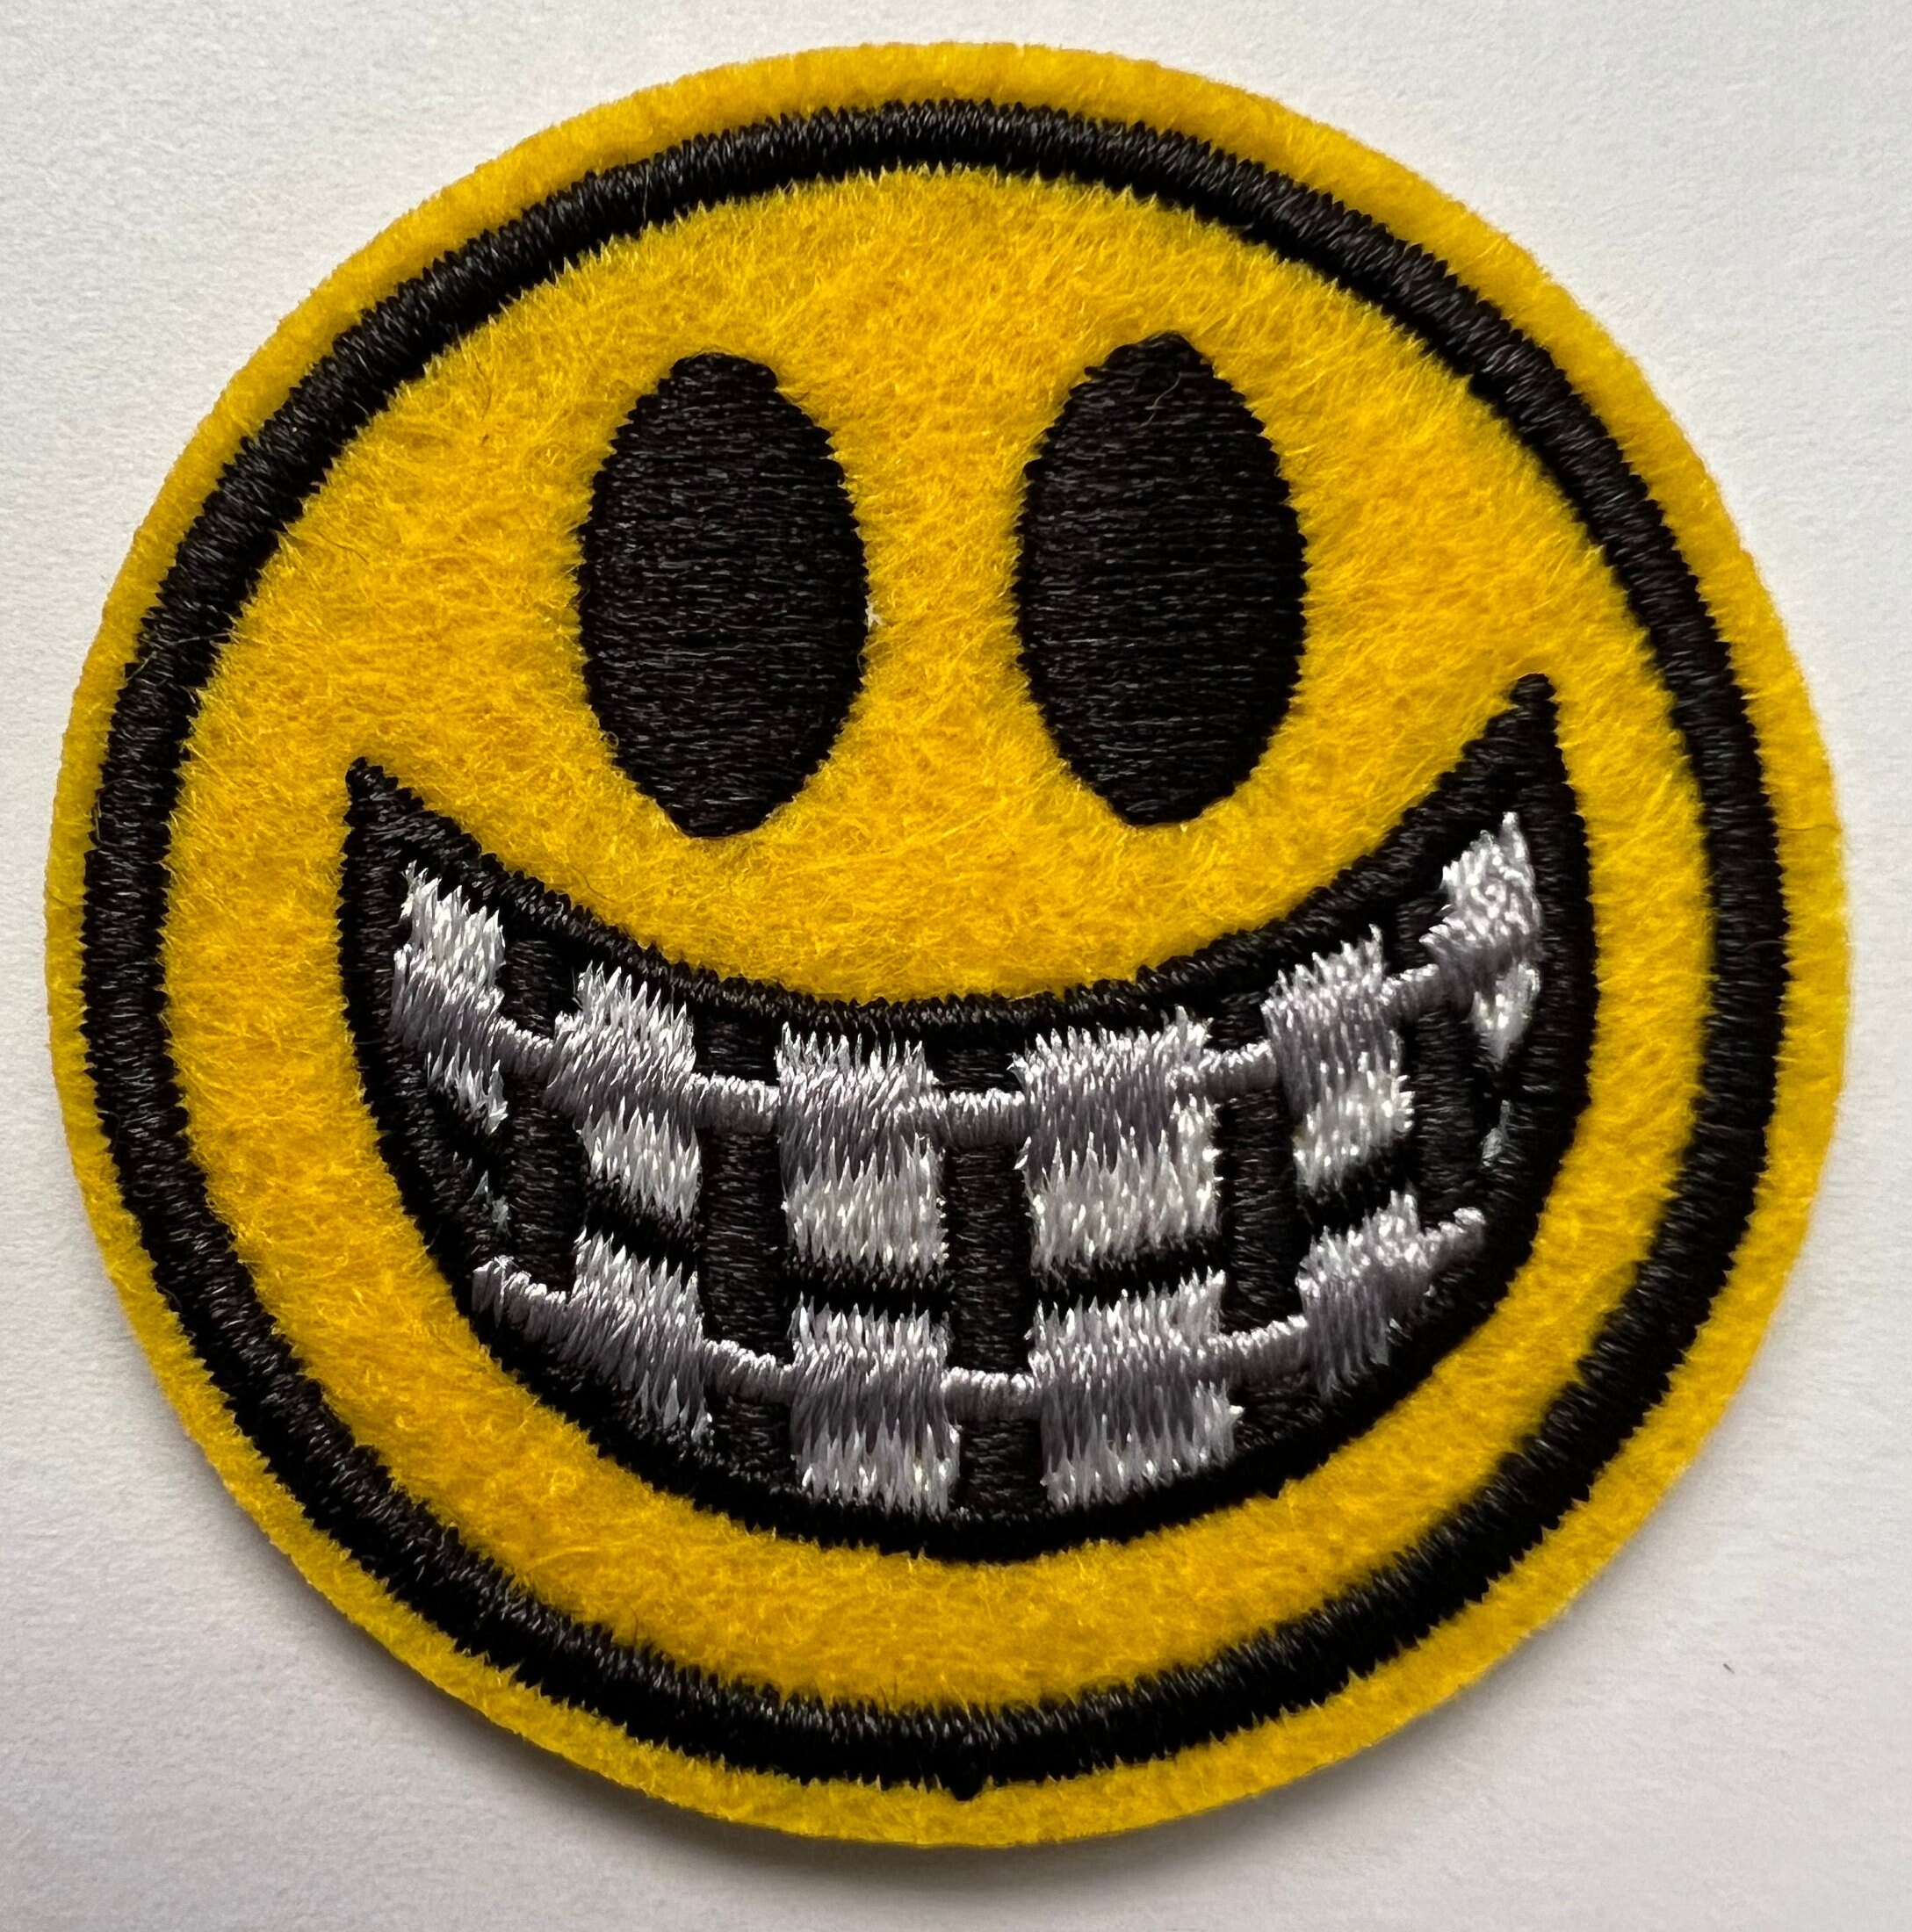 Smile Face Patch (2.5 x 2.5 Inches) 